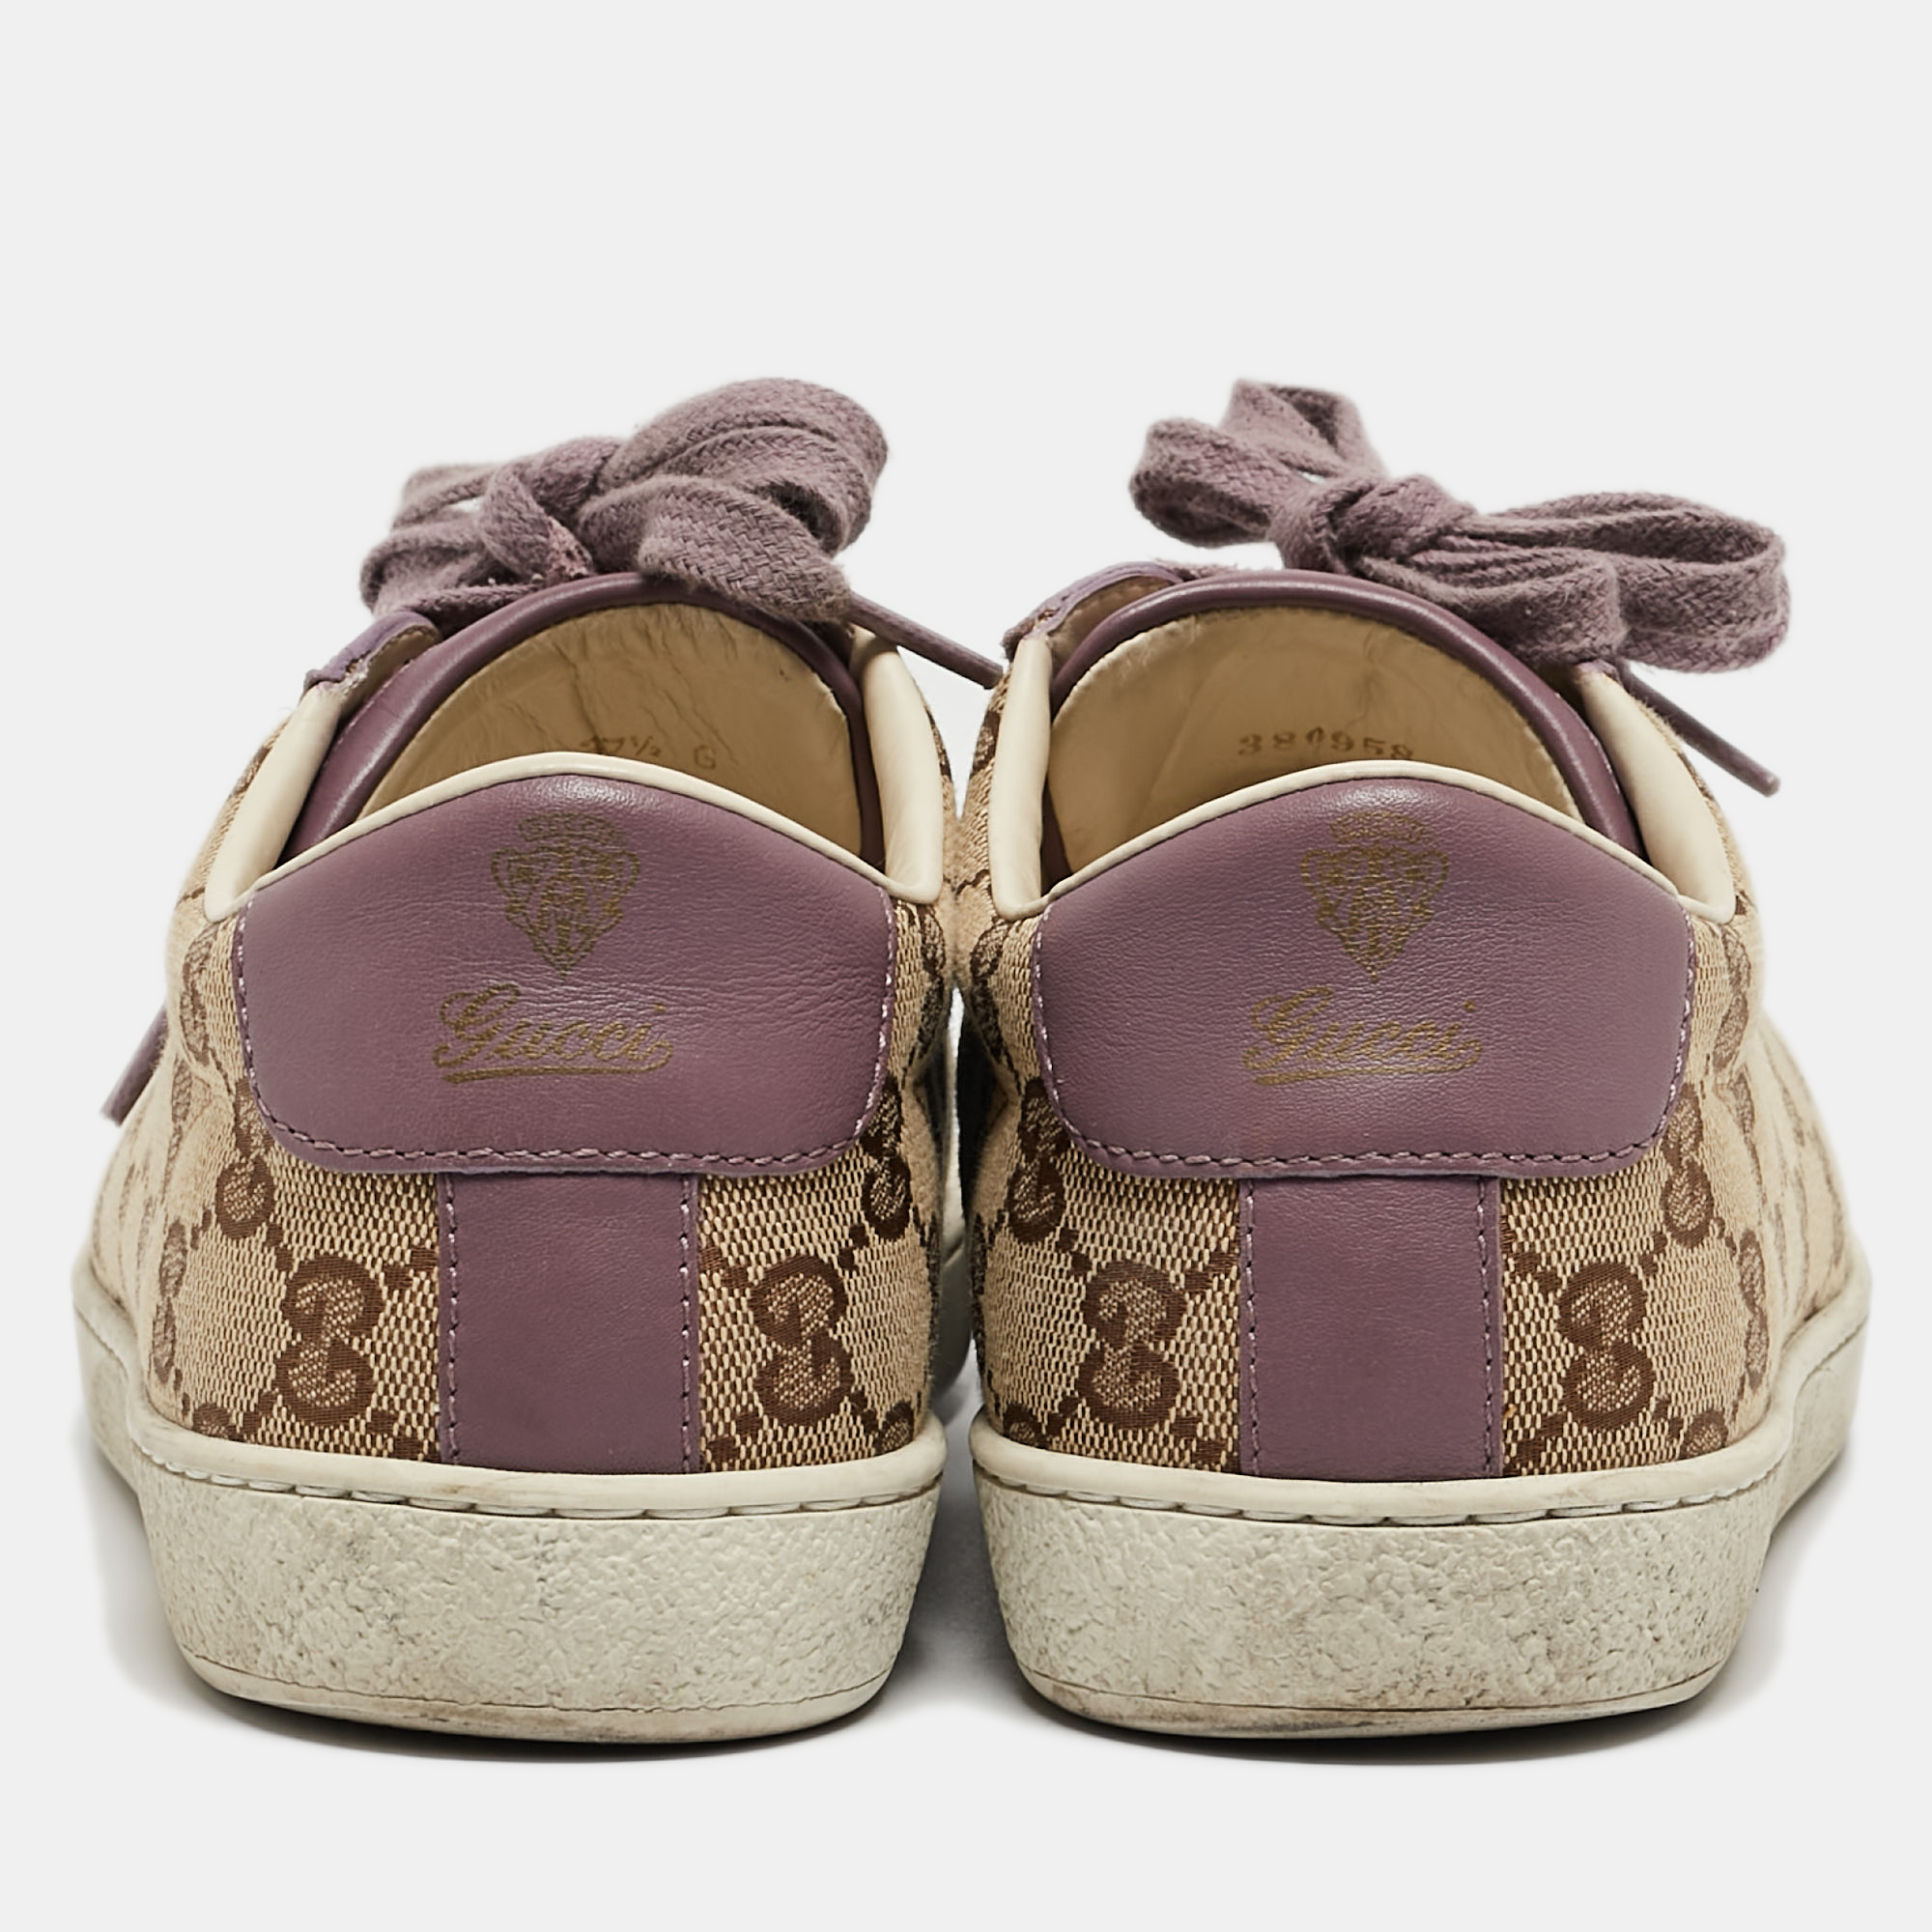 Gucci Purple/Beige Leather And Guccissima Canvas Low Top Sneakers Size 37.5